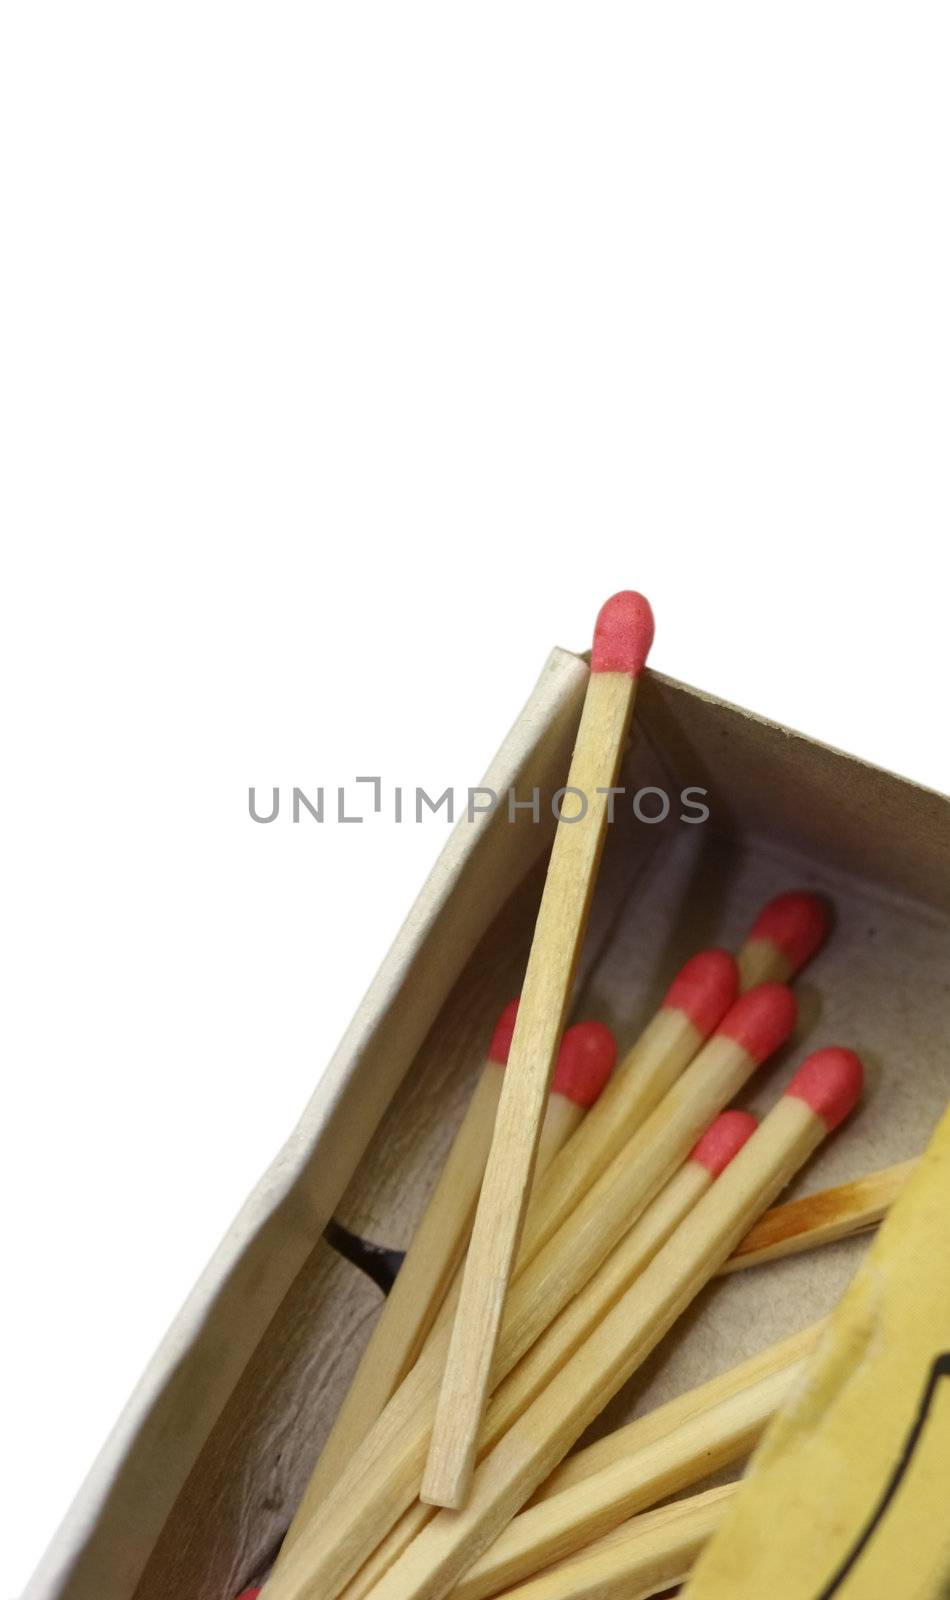 match sticks in a cardboard box isolated on white